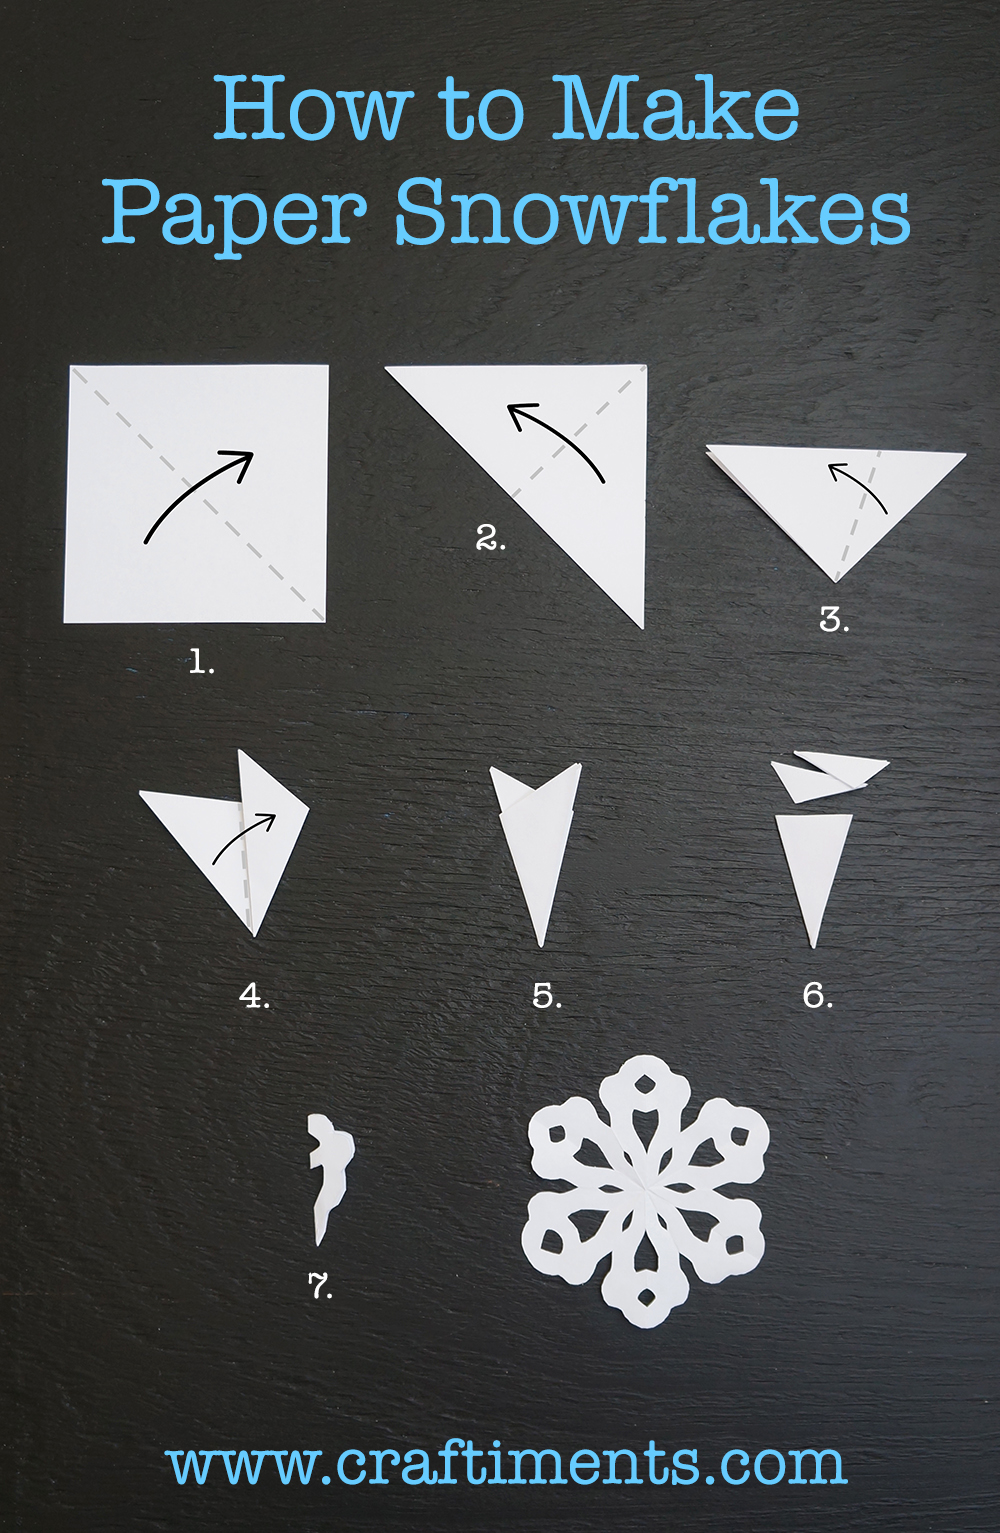 Paper snowflakes, Make paper and Snowflakes on Pinterest